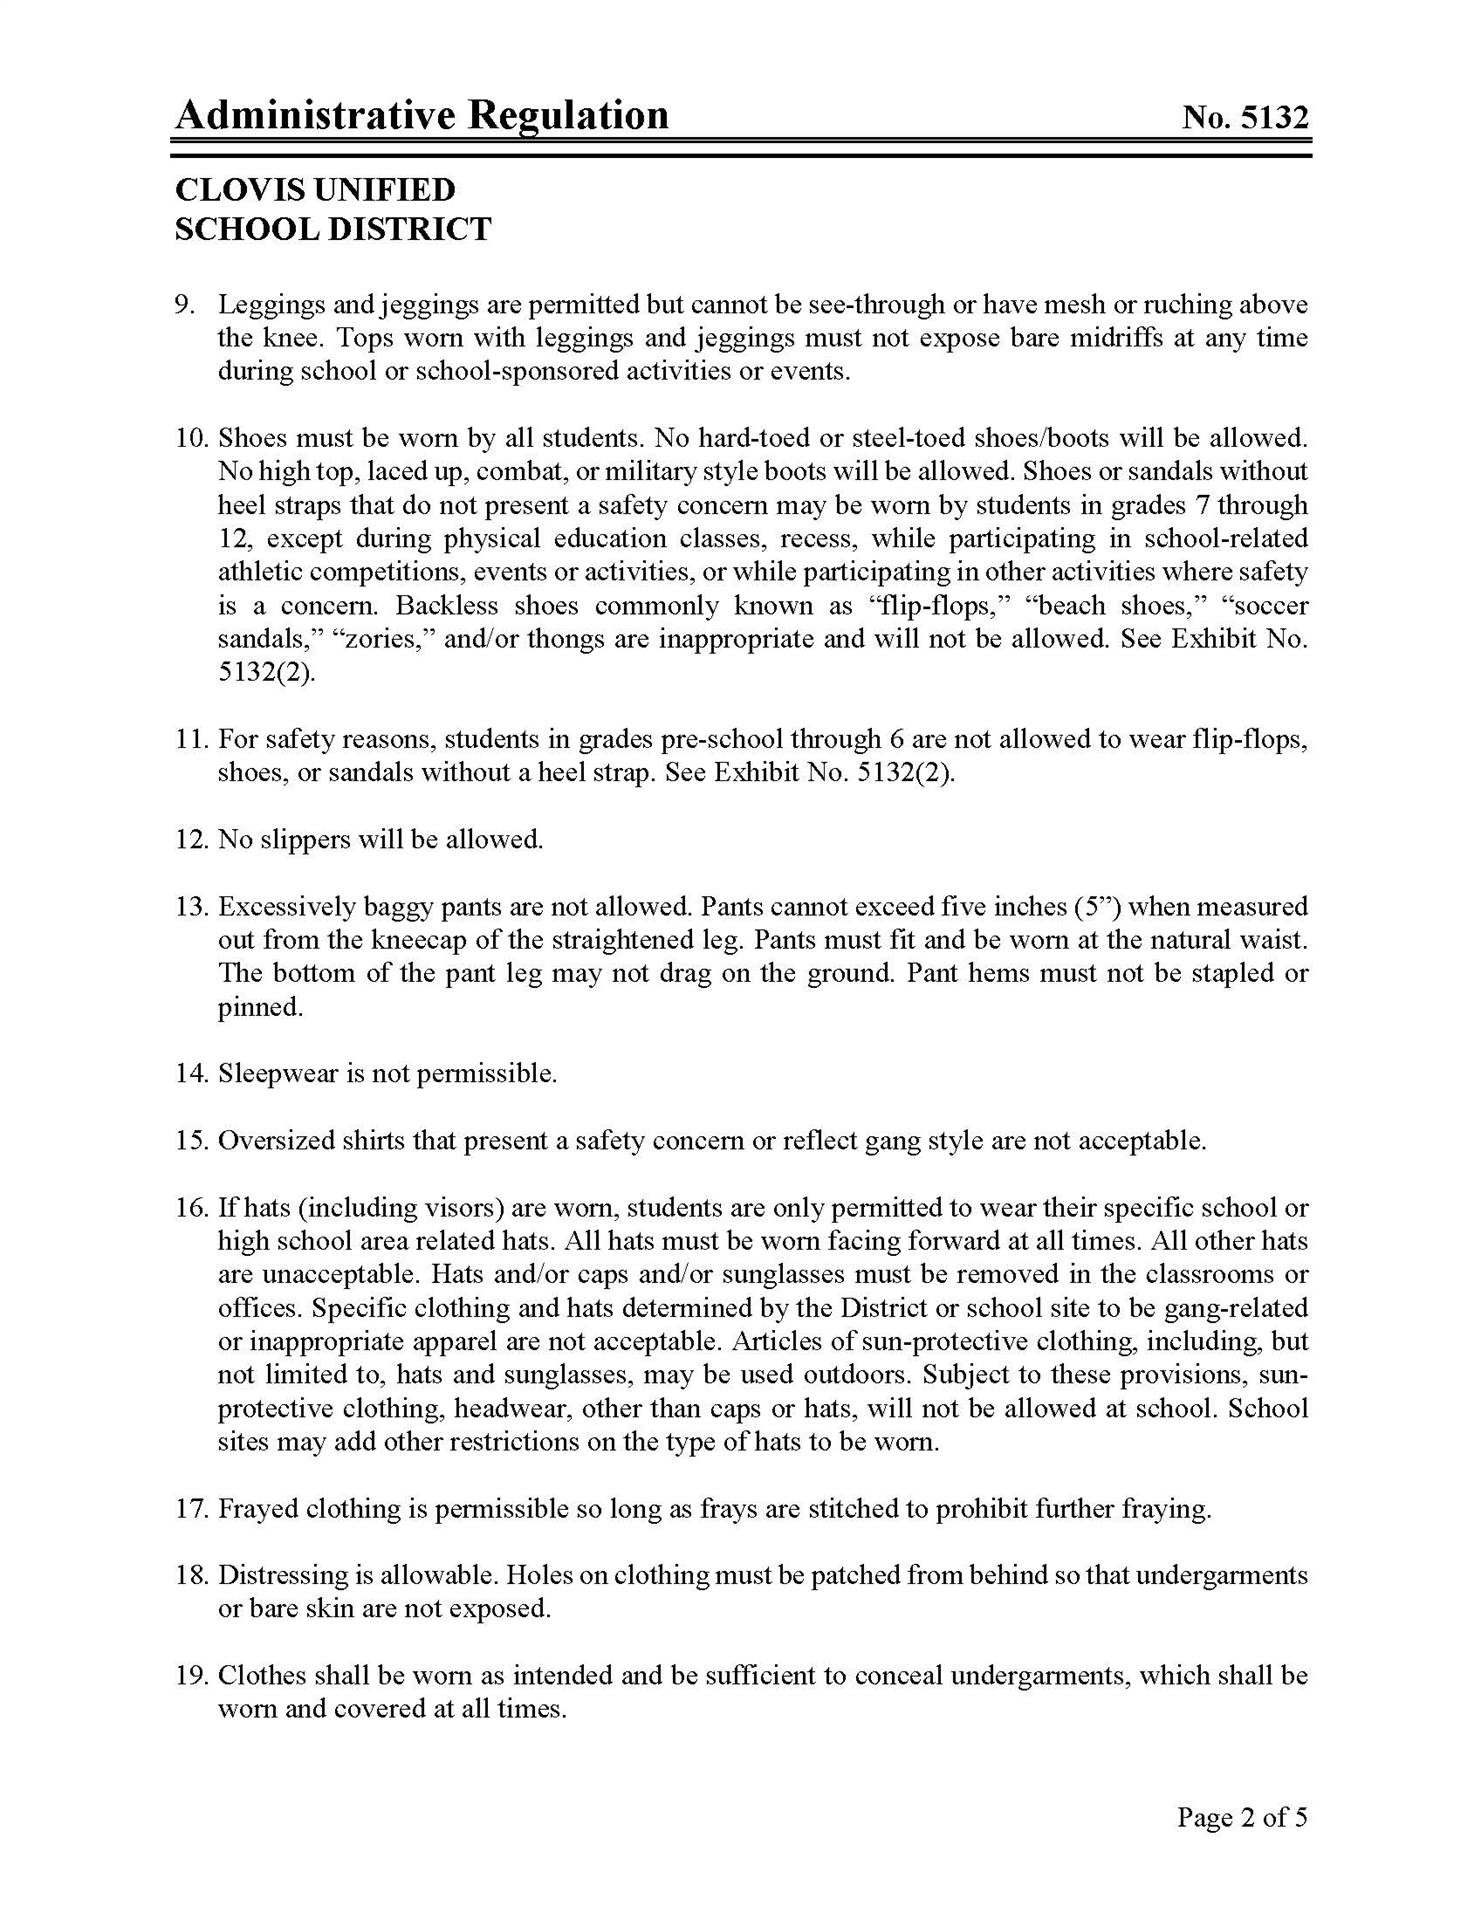 5132 AR Page 2 - Full text downloadable below